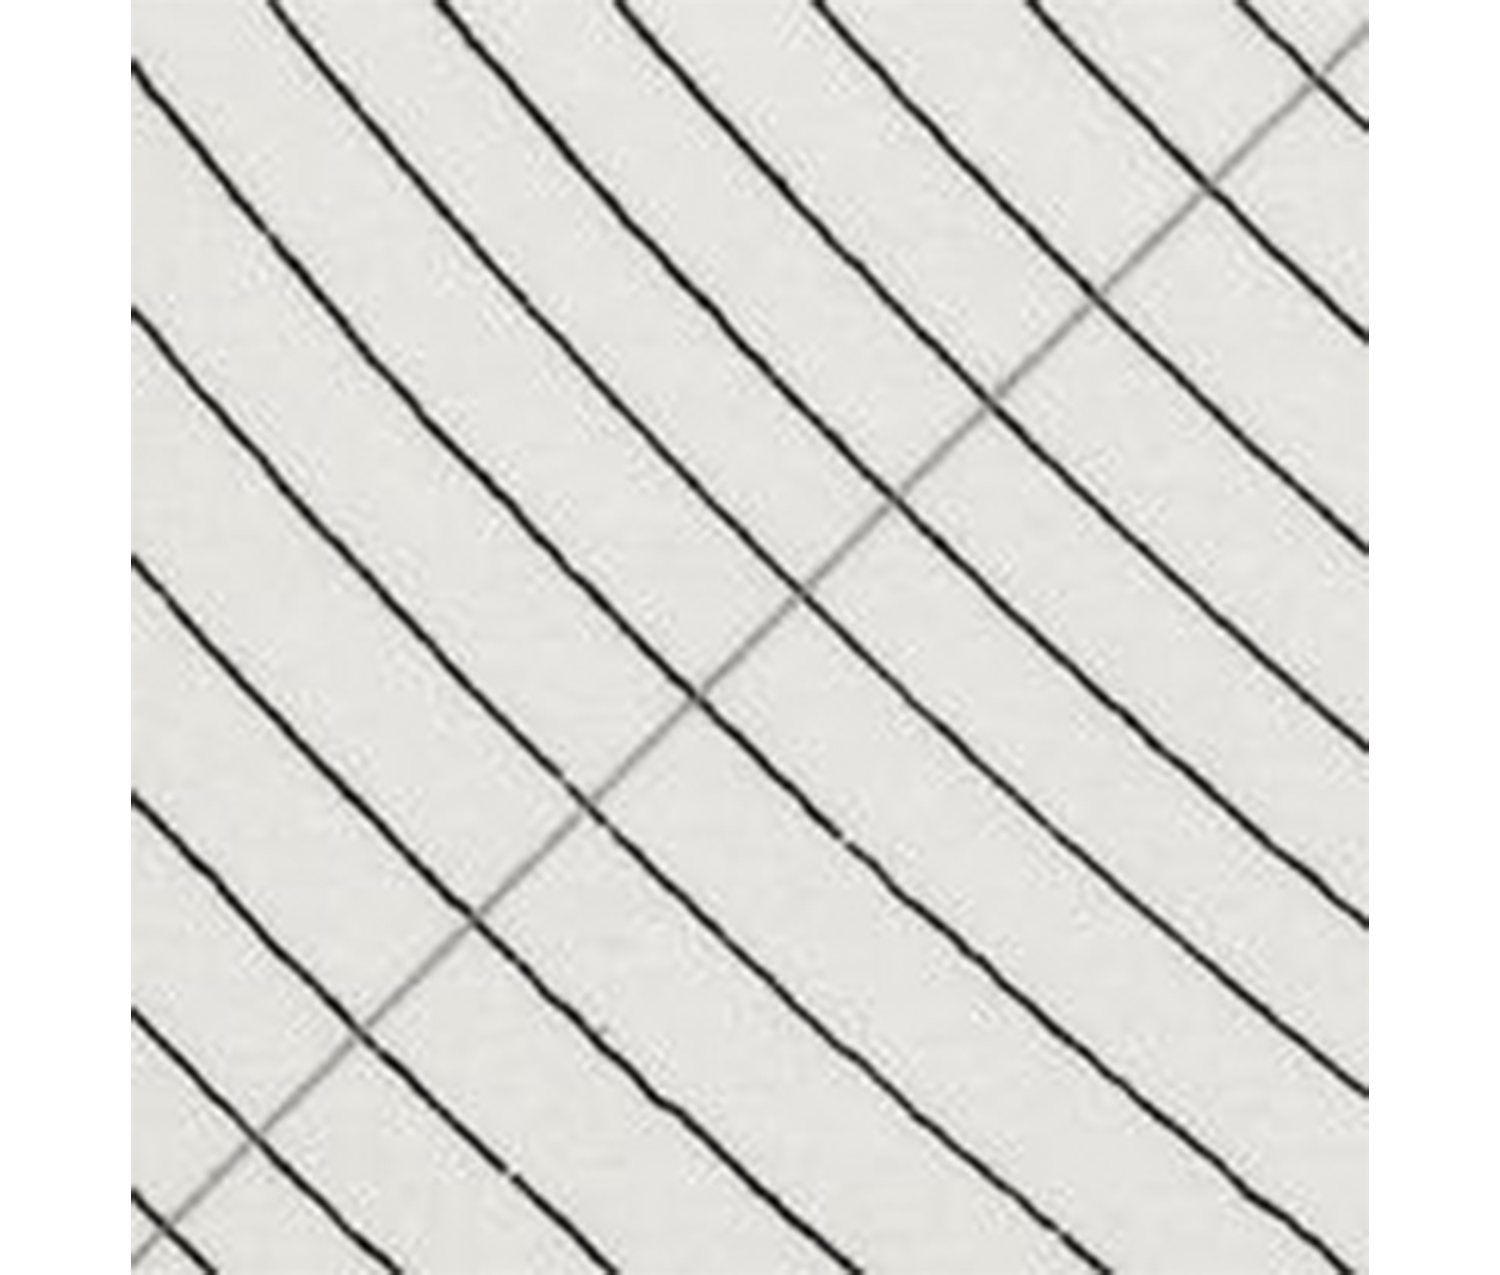 one gray diagonal line from bottom left to top right corner; twelve black diagonal lines from top left to bottom right corner